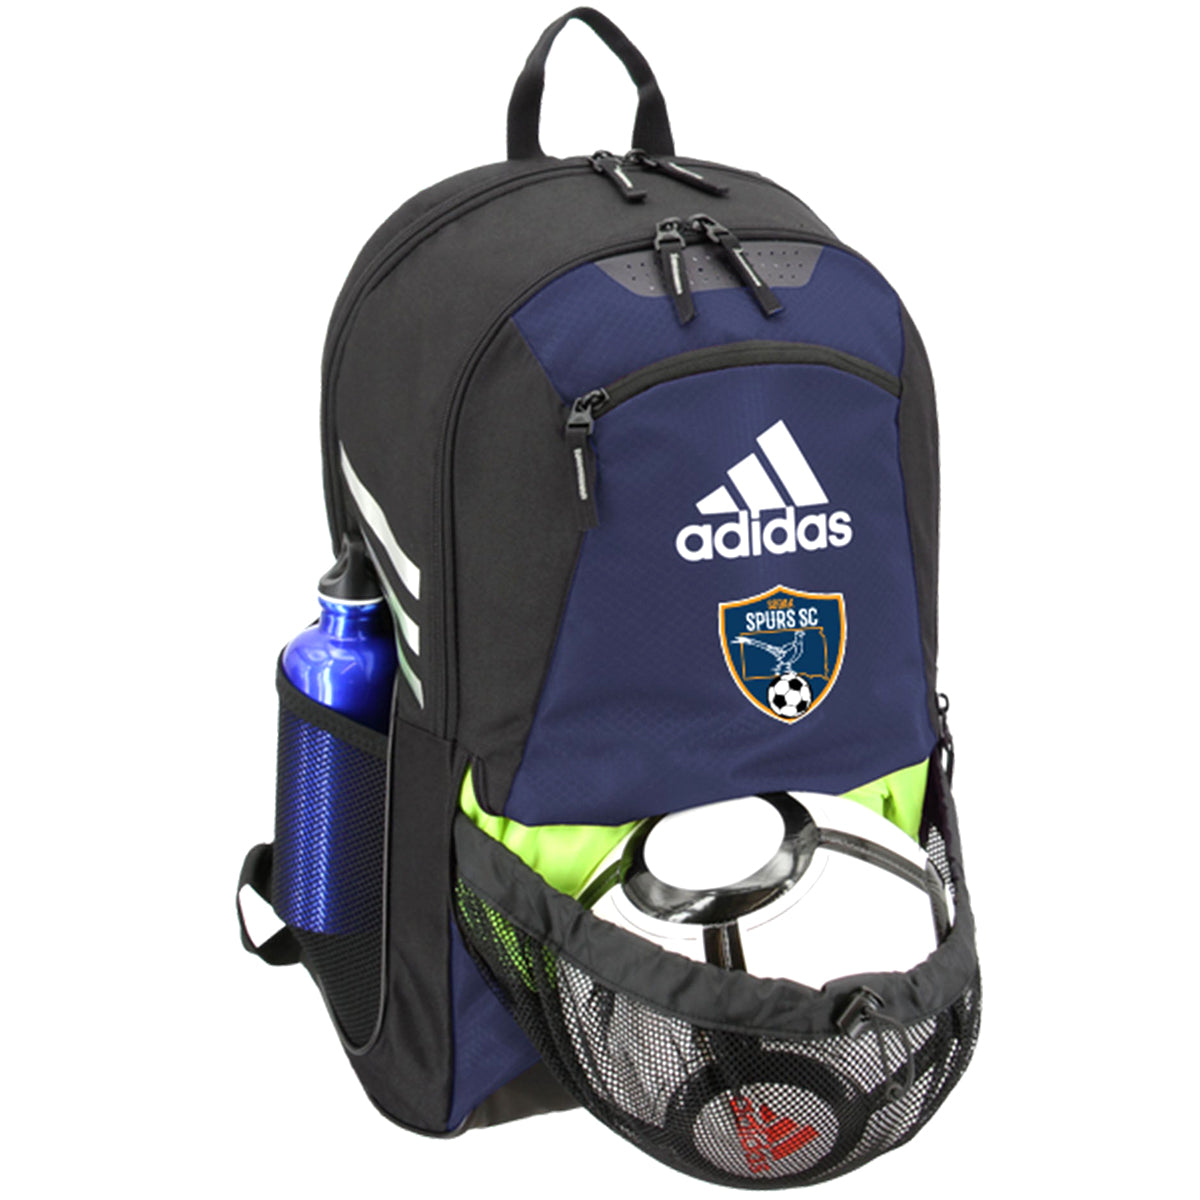 Playful Backpacks, Adidas Hosts a Soccer Tournament and More